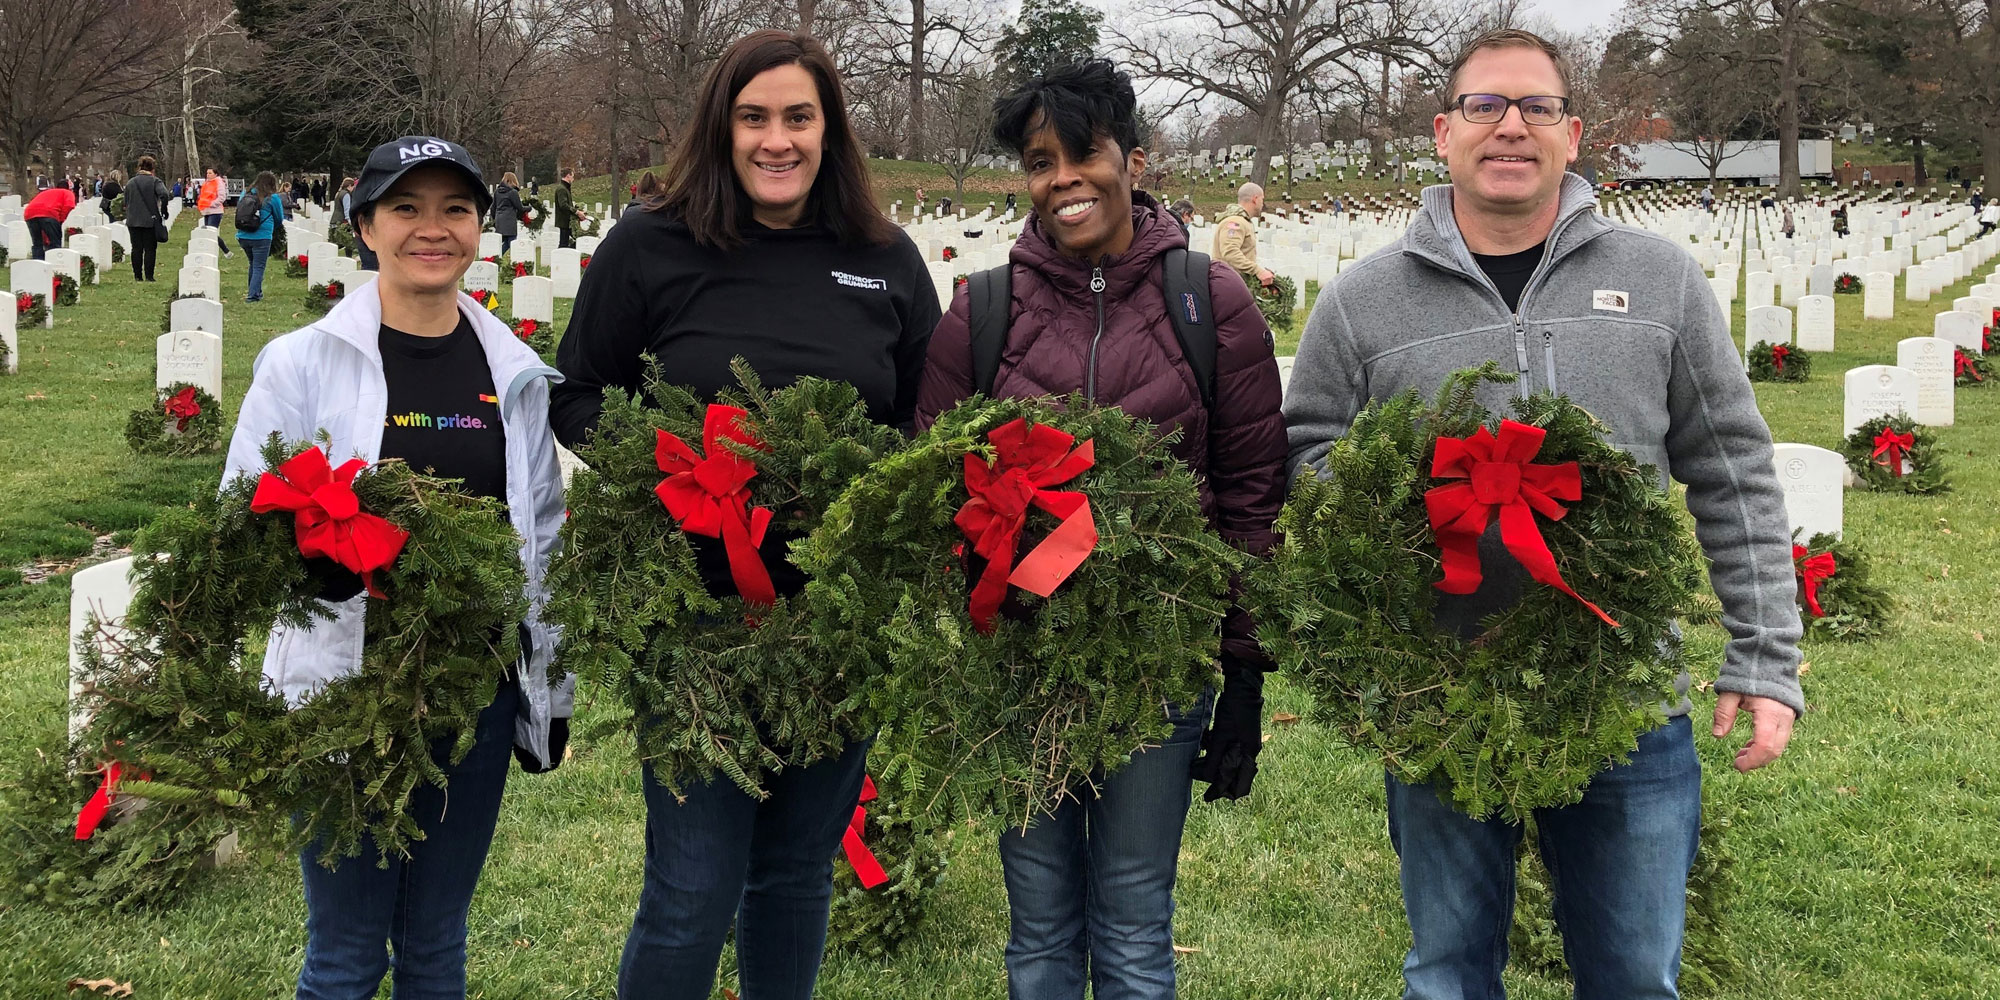 Four people standing outside in a cemetary holding holiday wreaths.